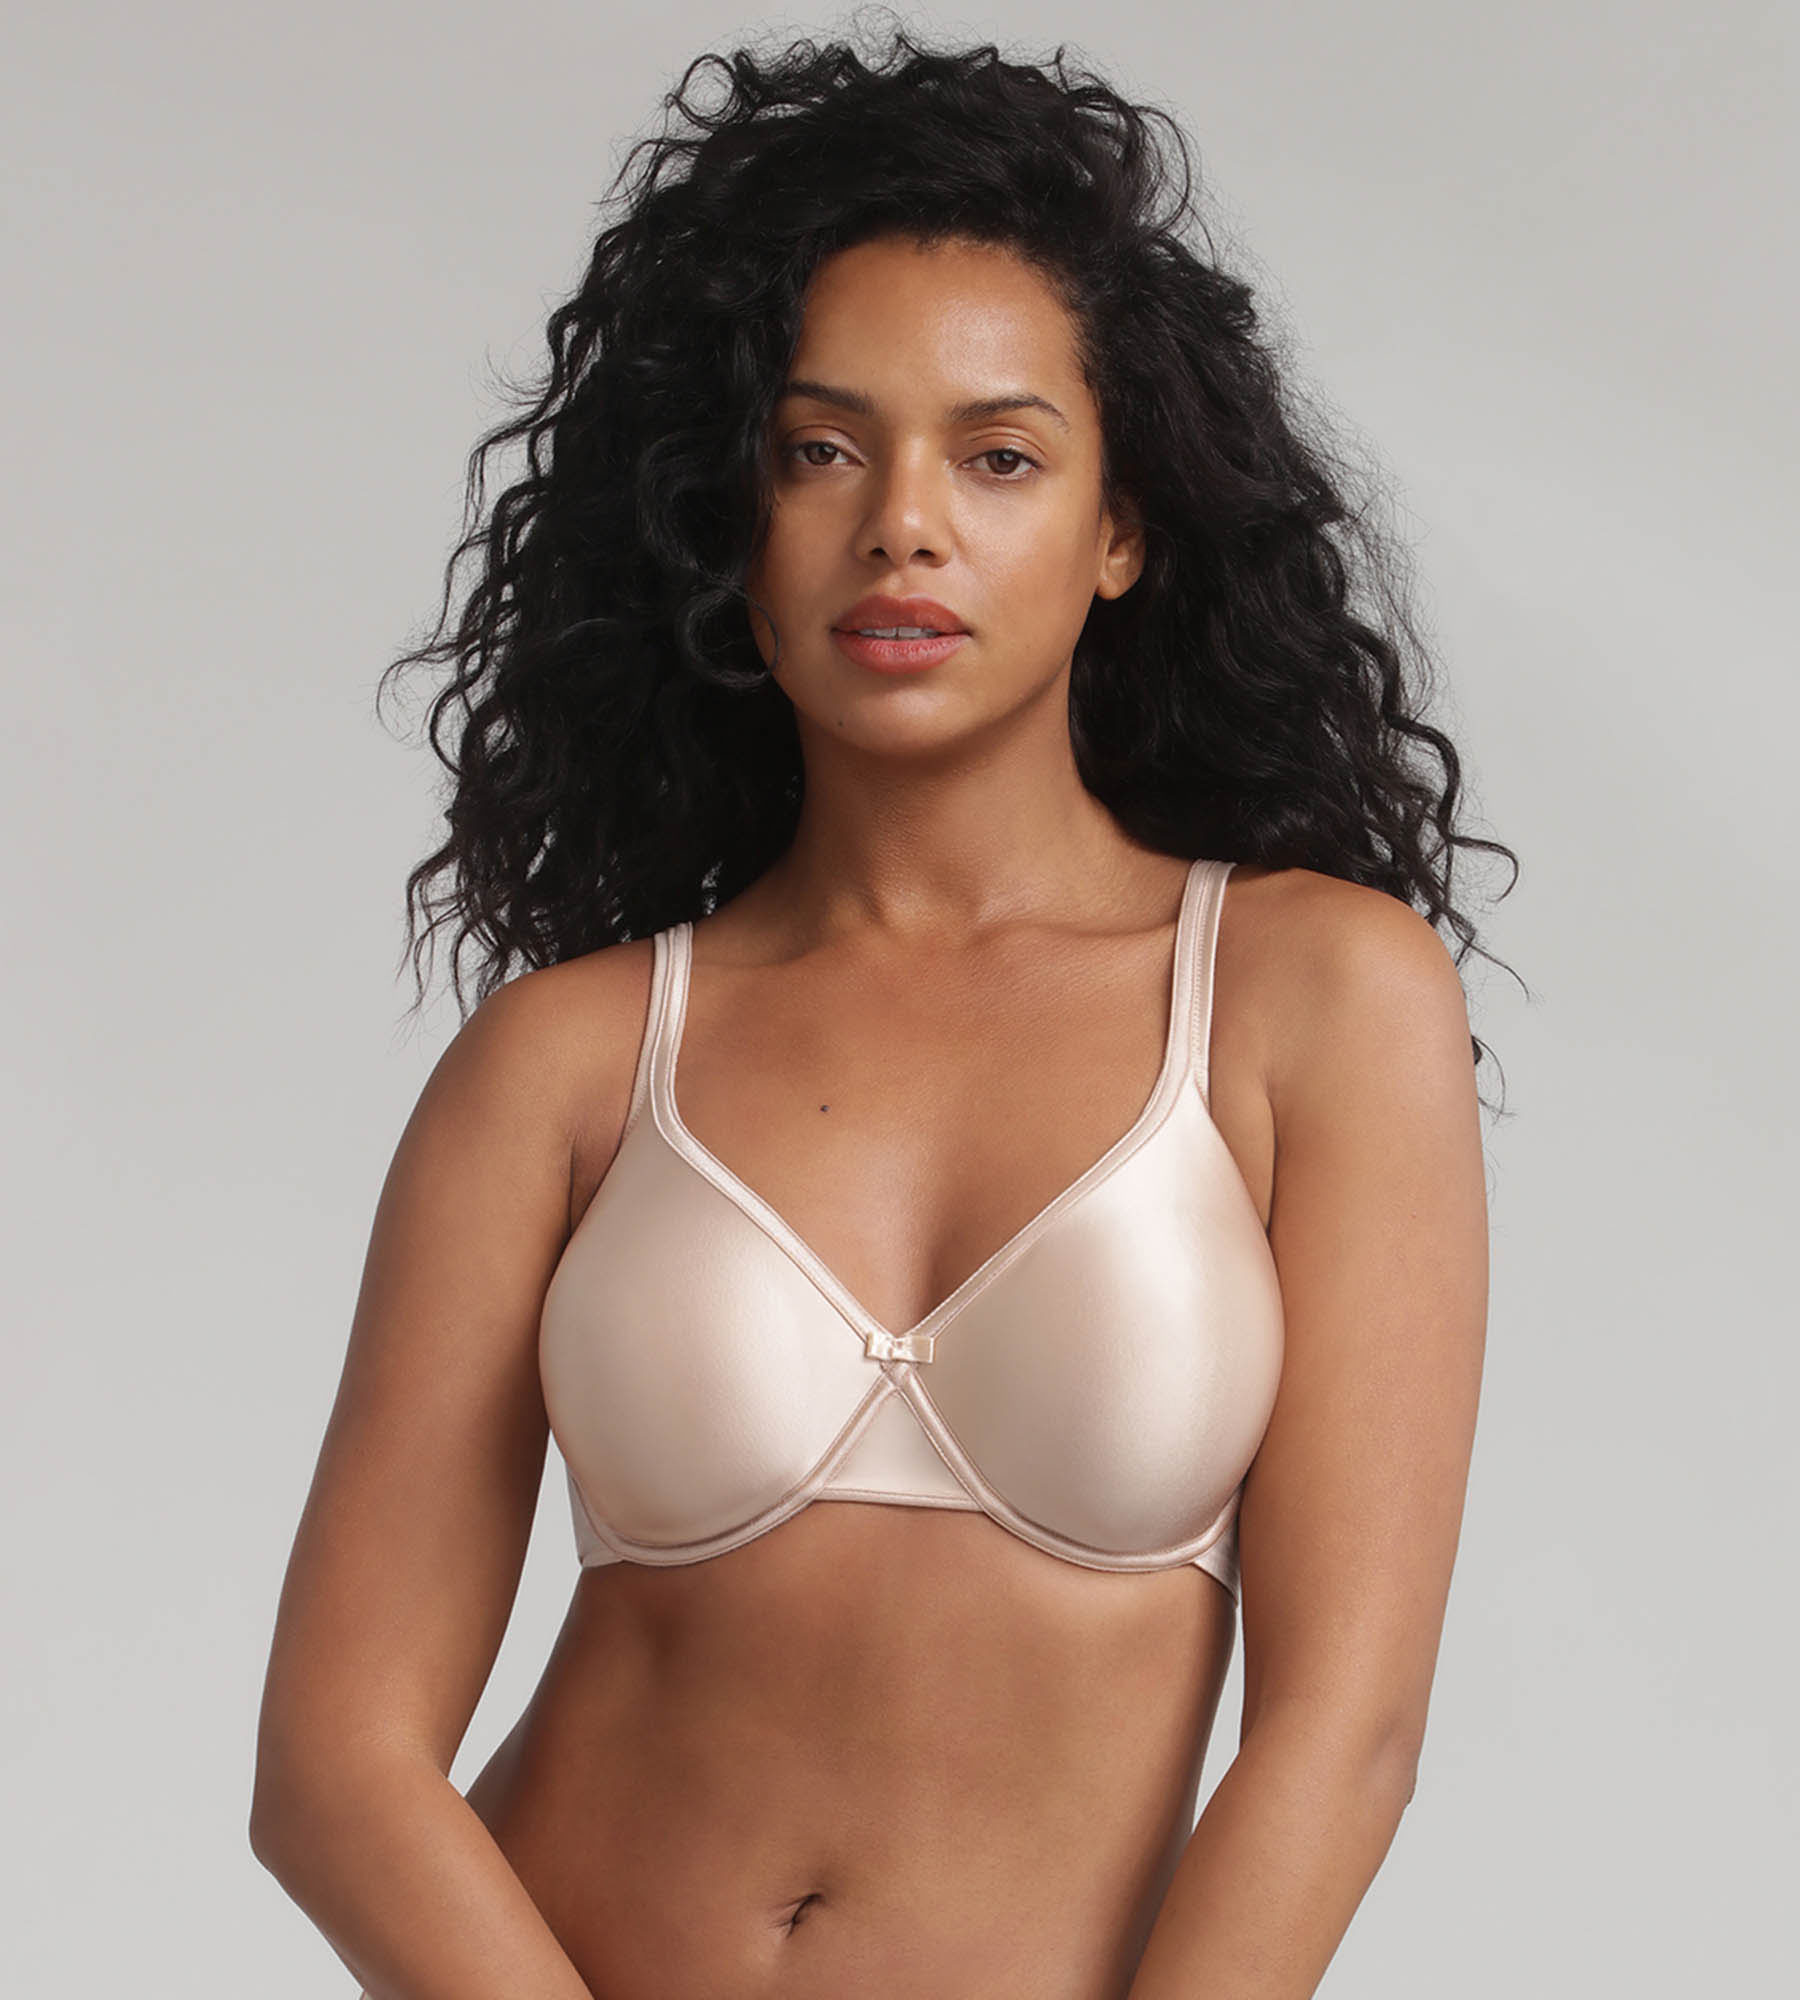 Full Cup Underwired Bra in Beige - Satiny Micro-Support, , PLAYTEX